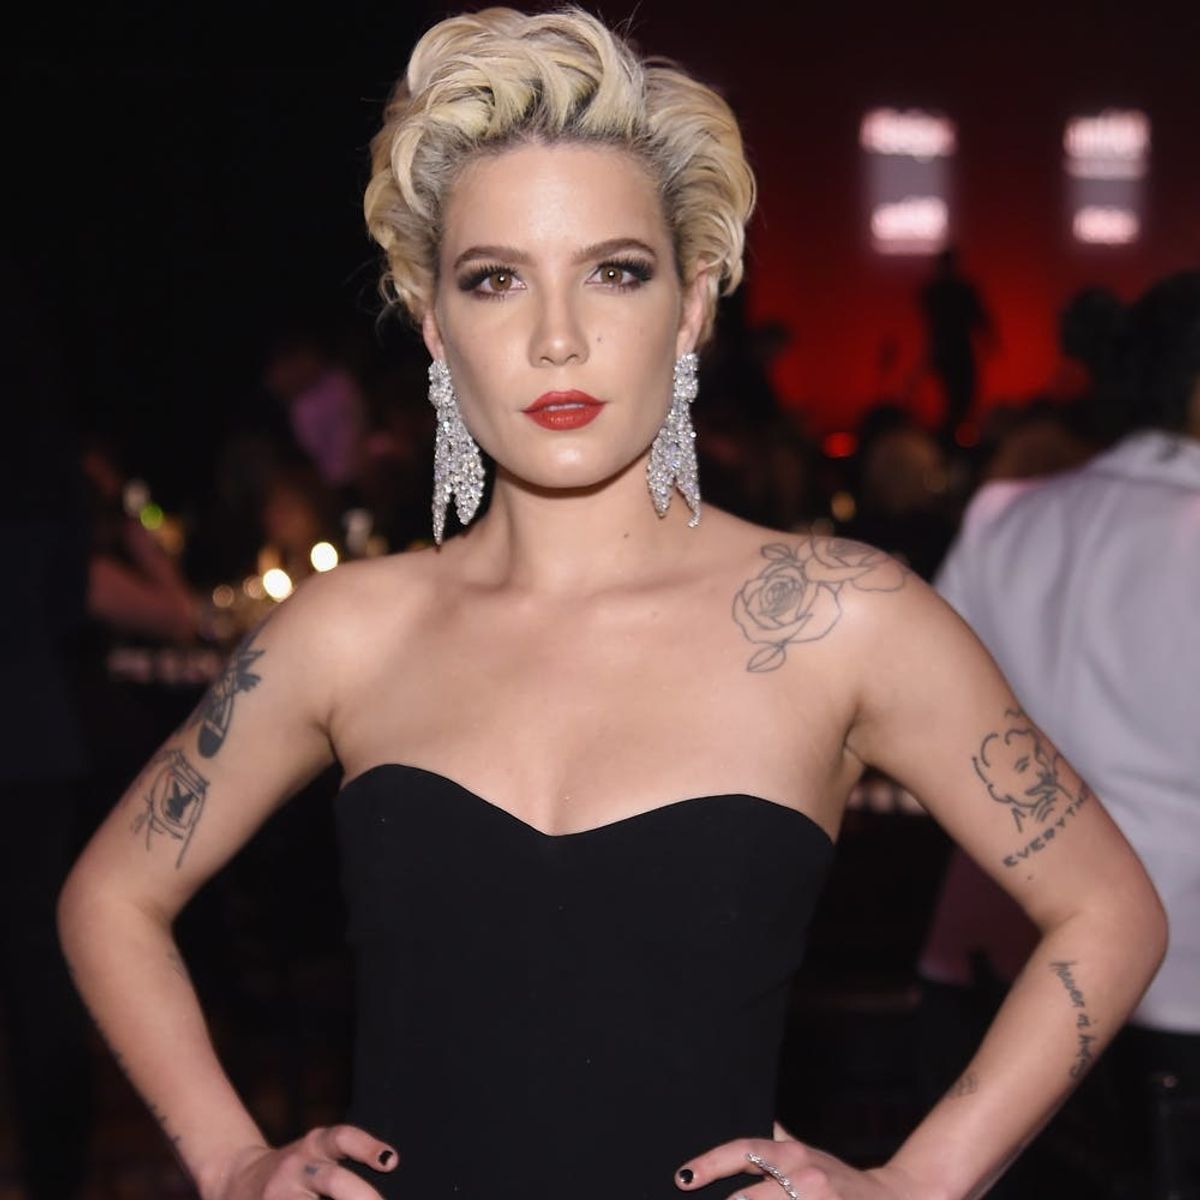 Halsey Just Landed a Major Beauty Deal Thanks to THIS Secret Talent